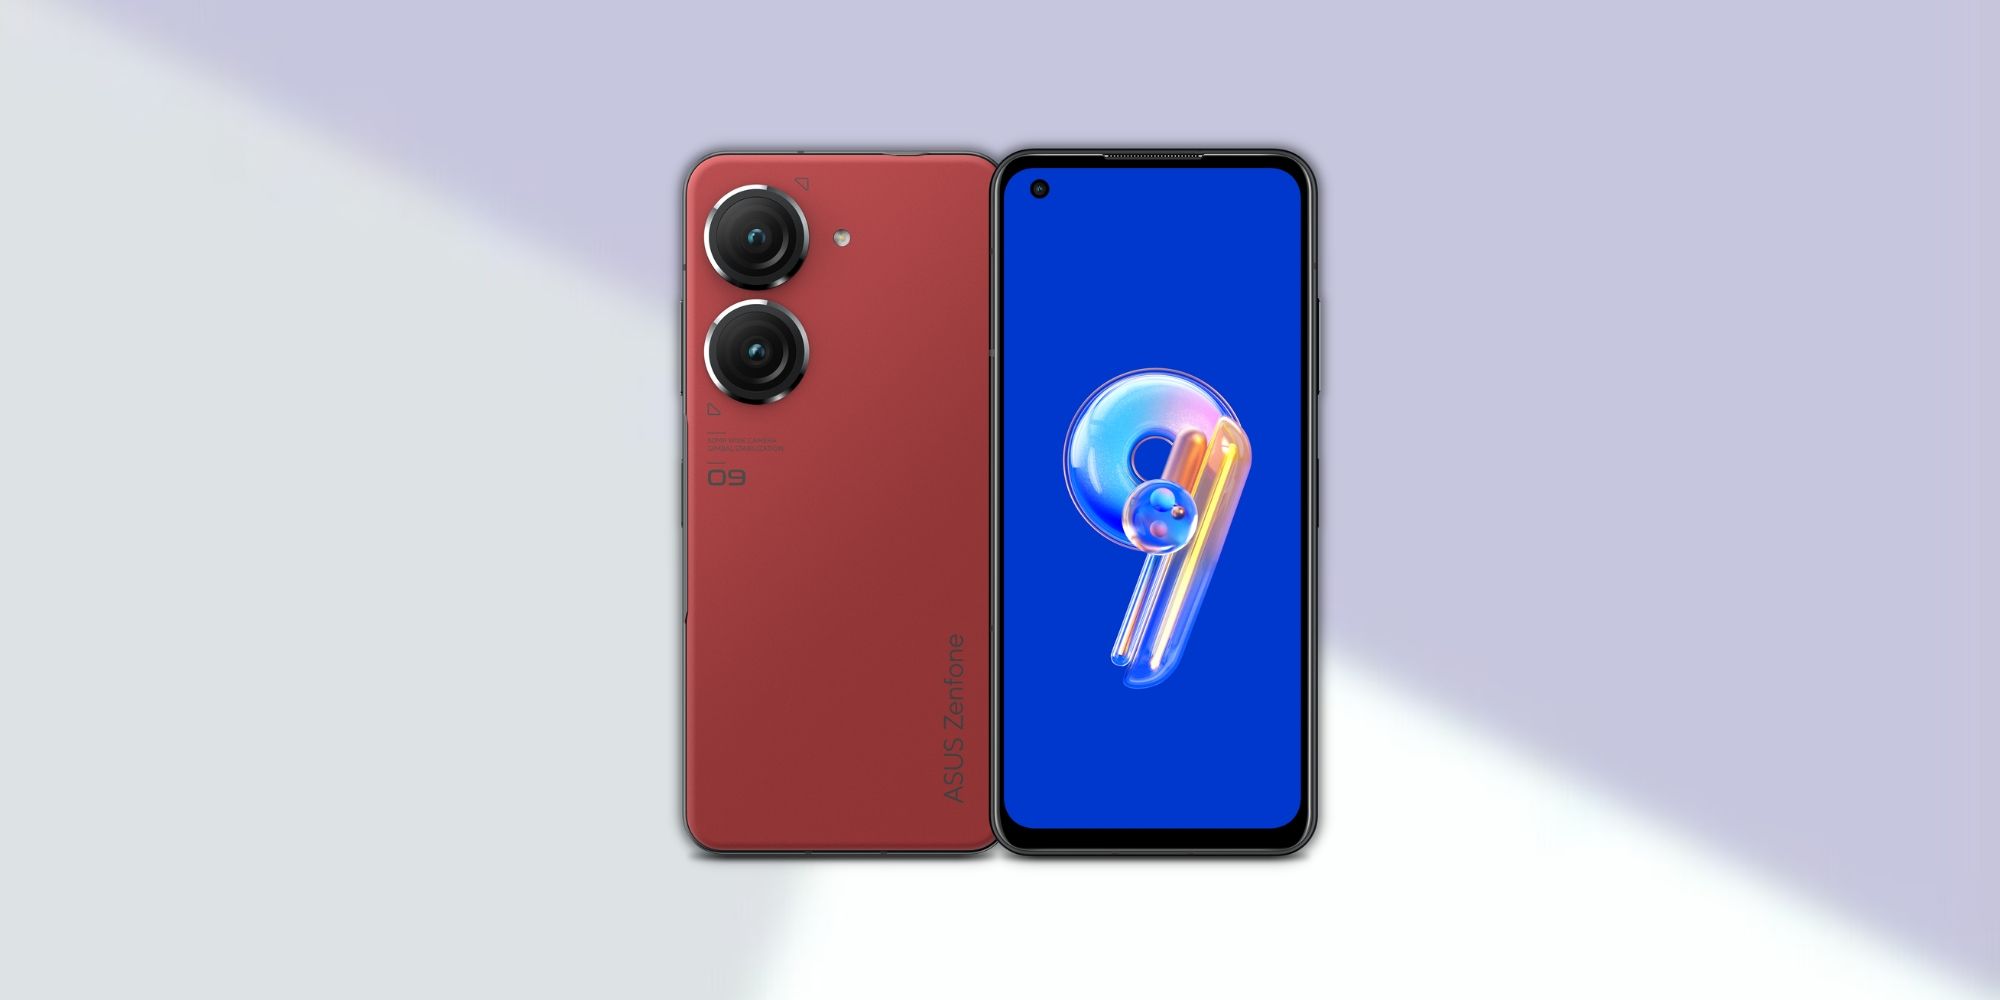 Image of the Asus Zenfone 9 in red color